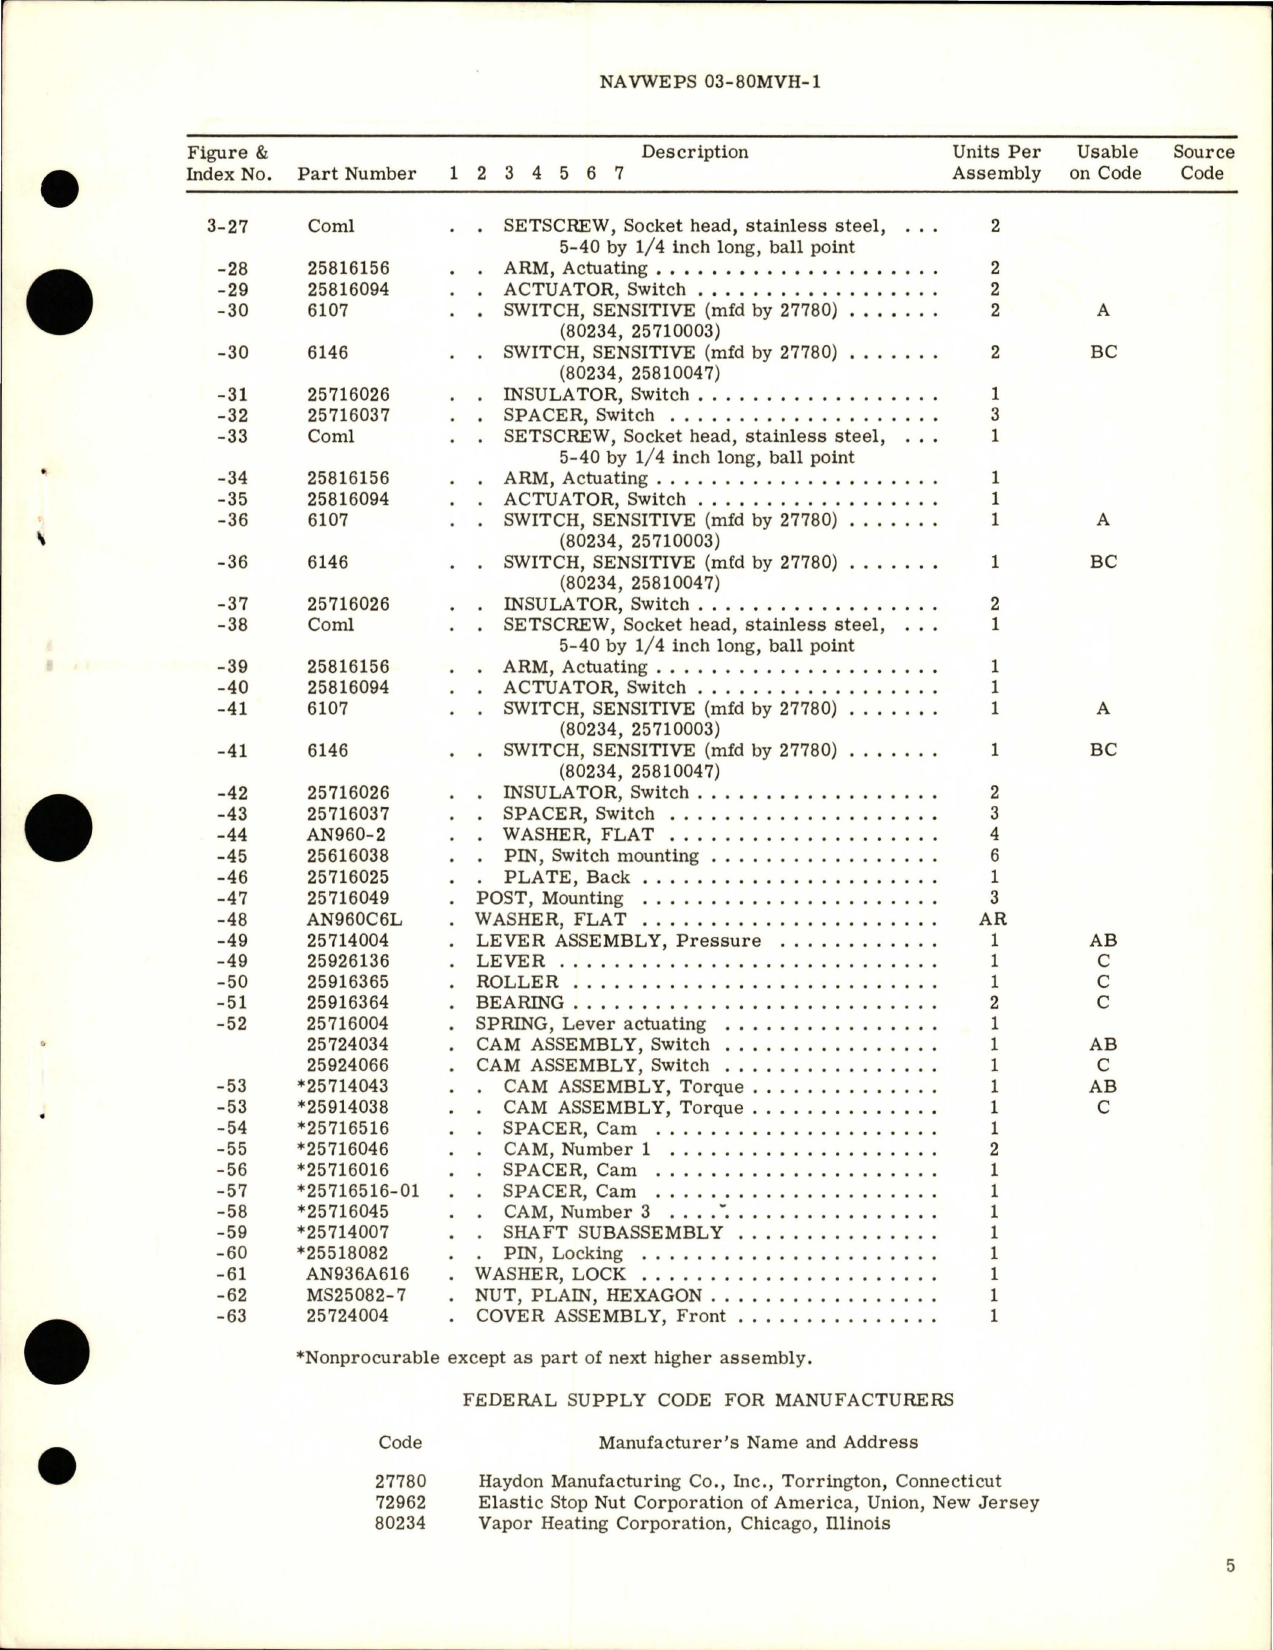 Sample page 5 from AirCorps Library document: Overhaul Instructions with Parts Breakdown for Selector Switch - Parts 25730018-02, 25730018-03, and 25730018-04